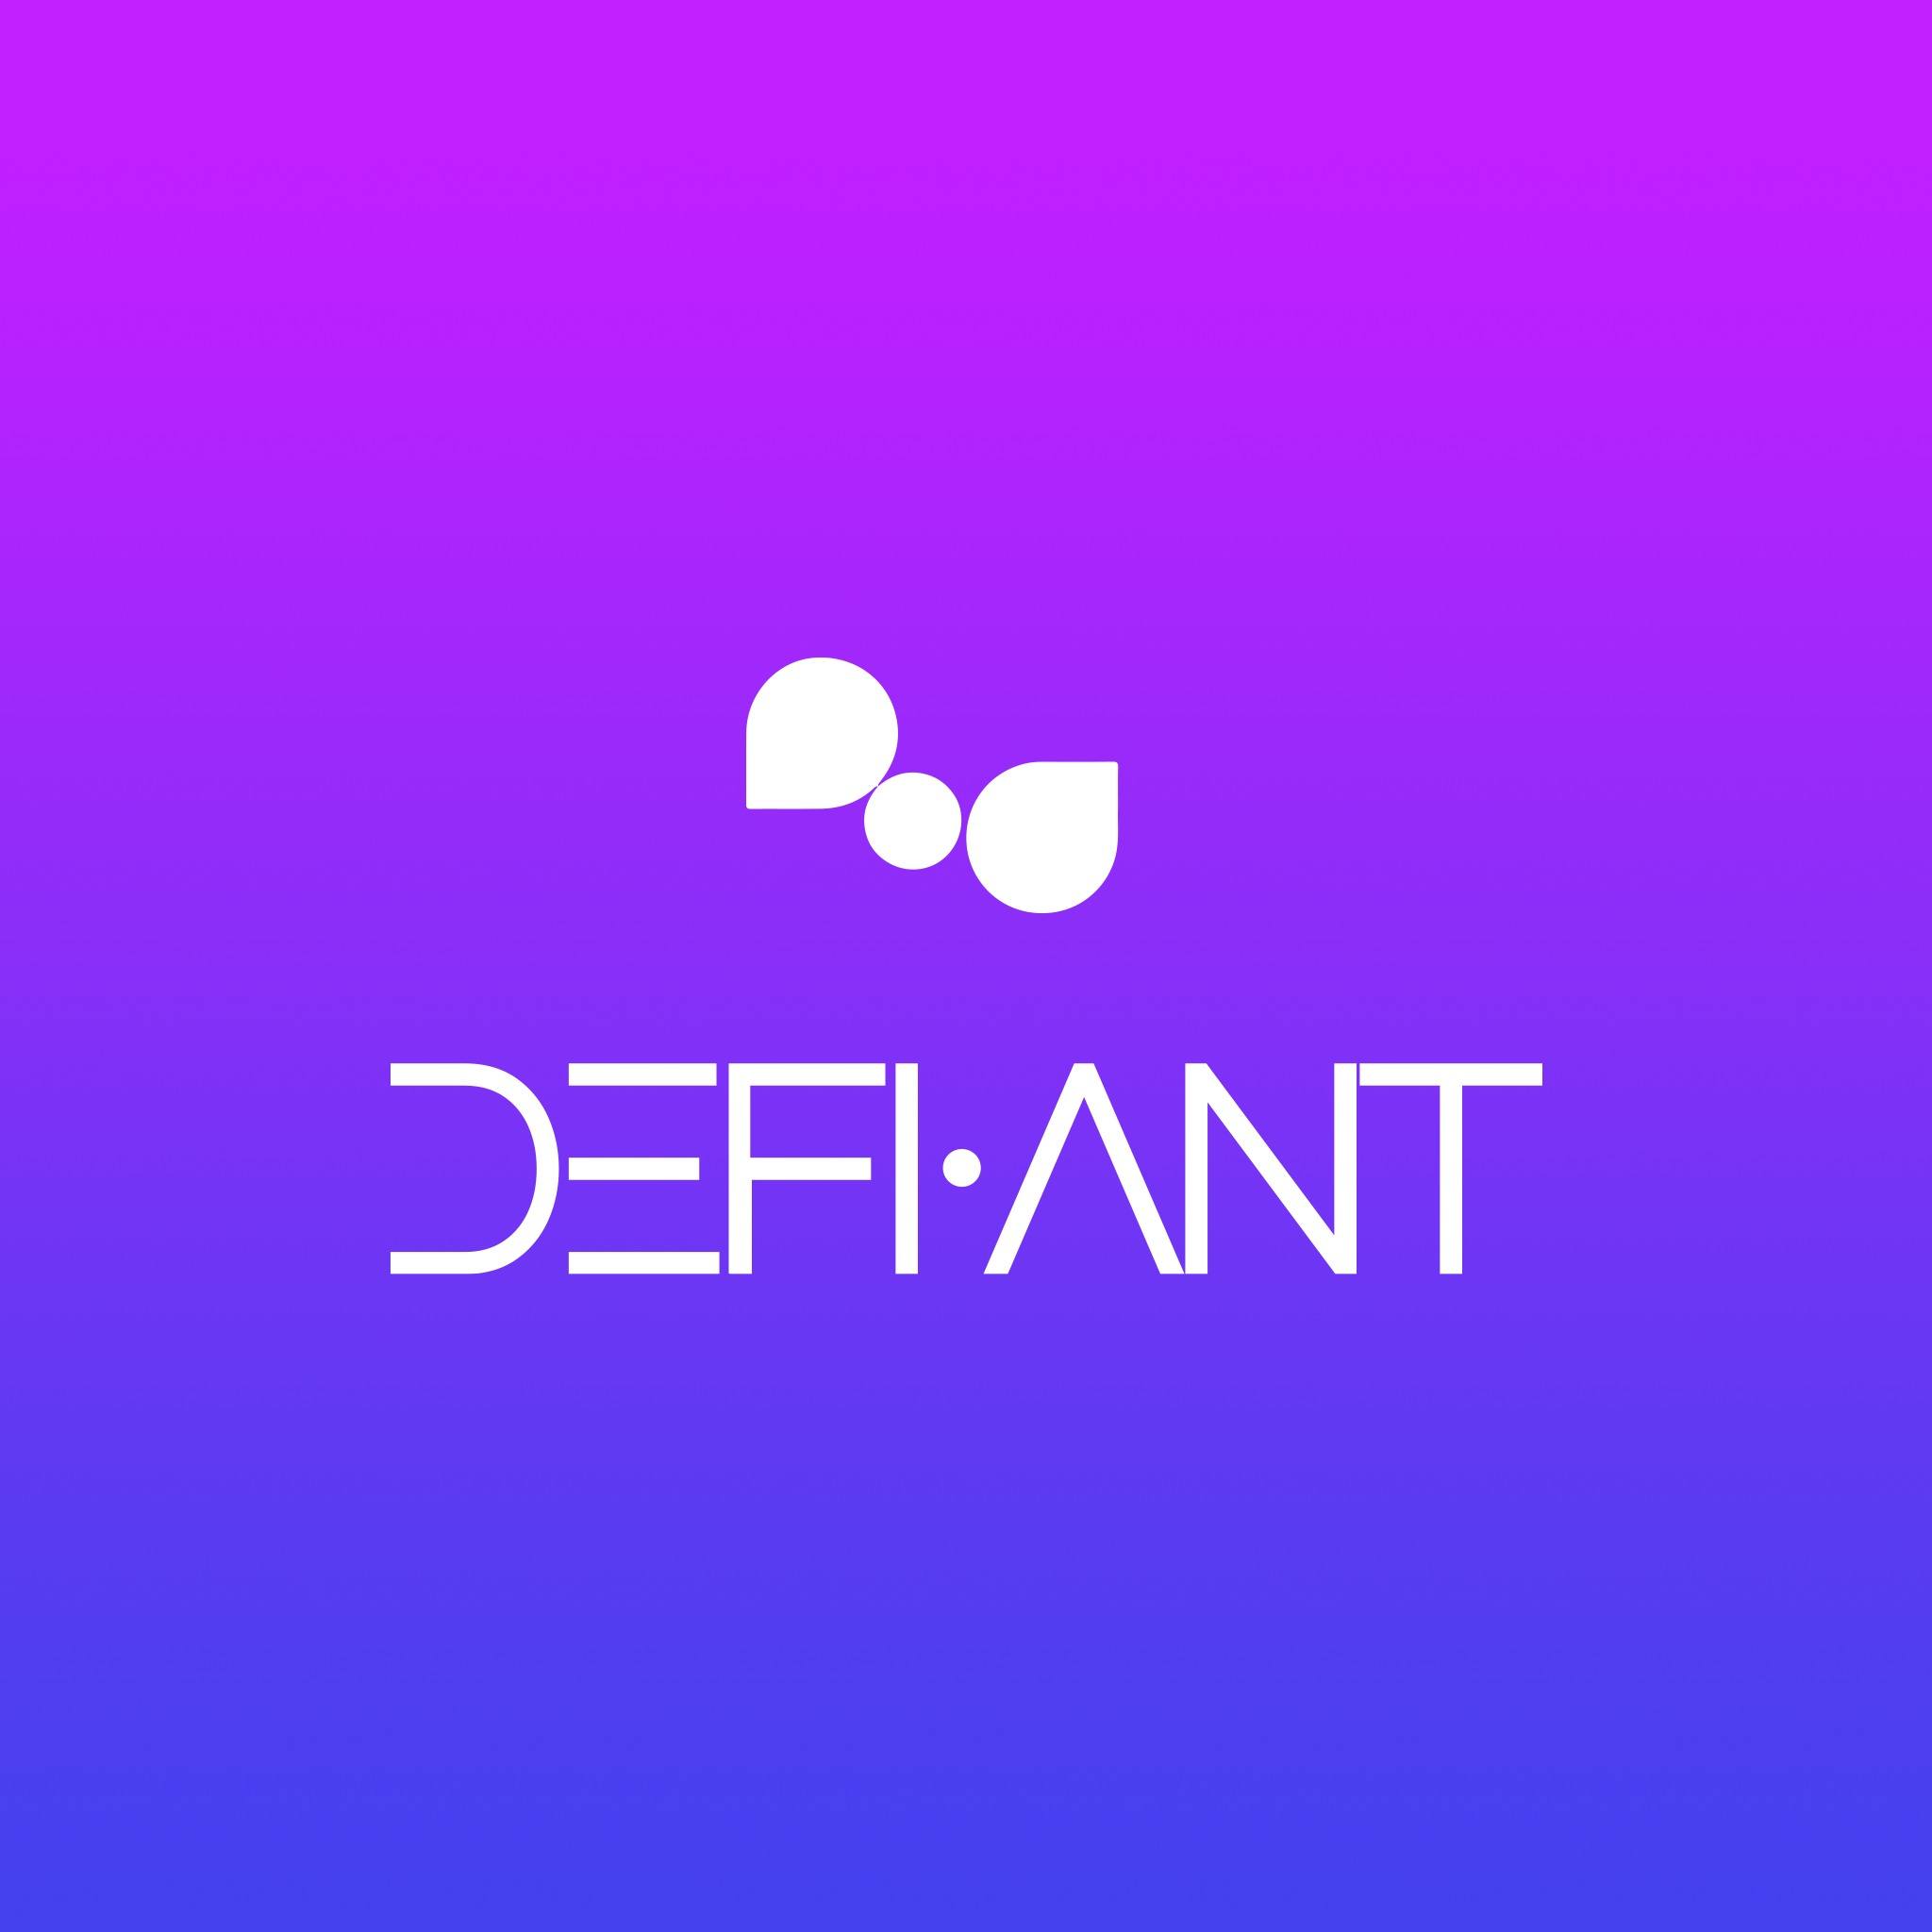 The newly launched NFT website Defi-Ant.io, Is Giving Its Users the Freedom to own real estate mortgages in the form of NFT pieces.